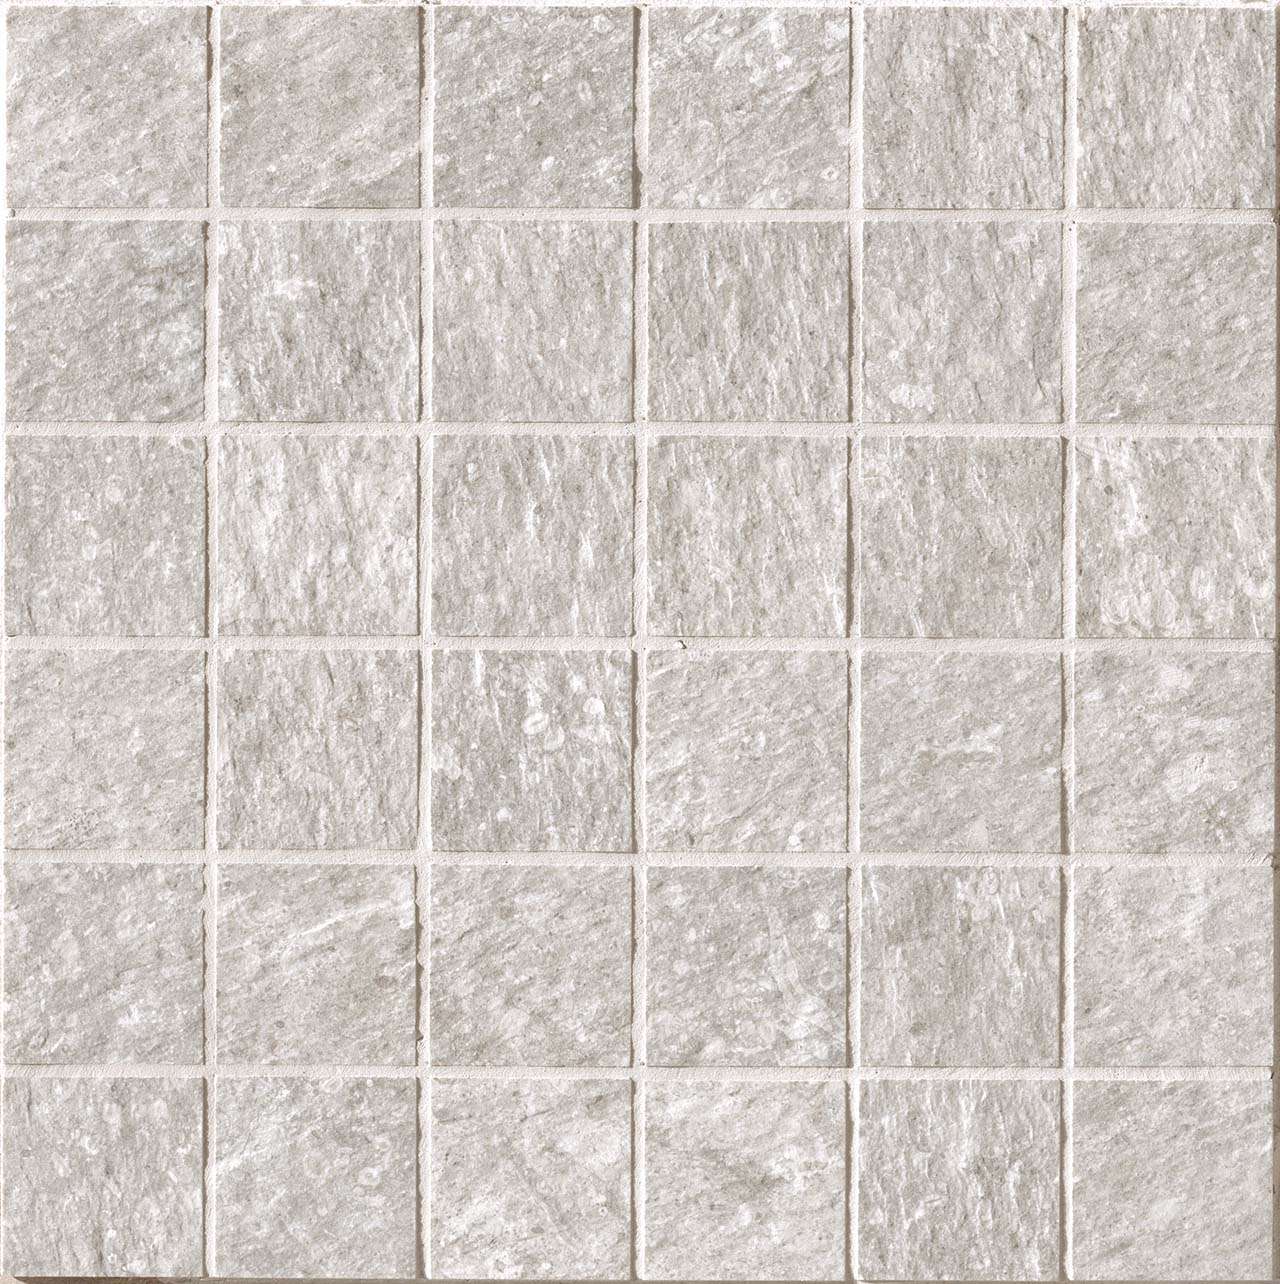 Fap Nord Artic Gres Macromosaico Out 30x30